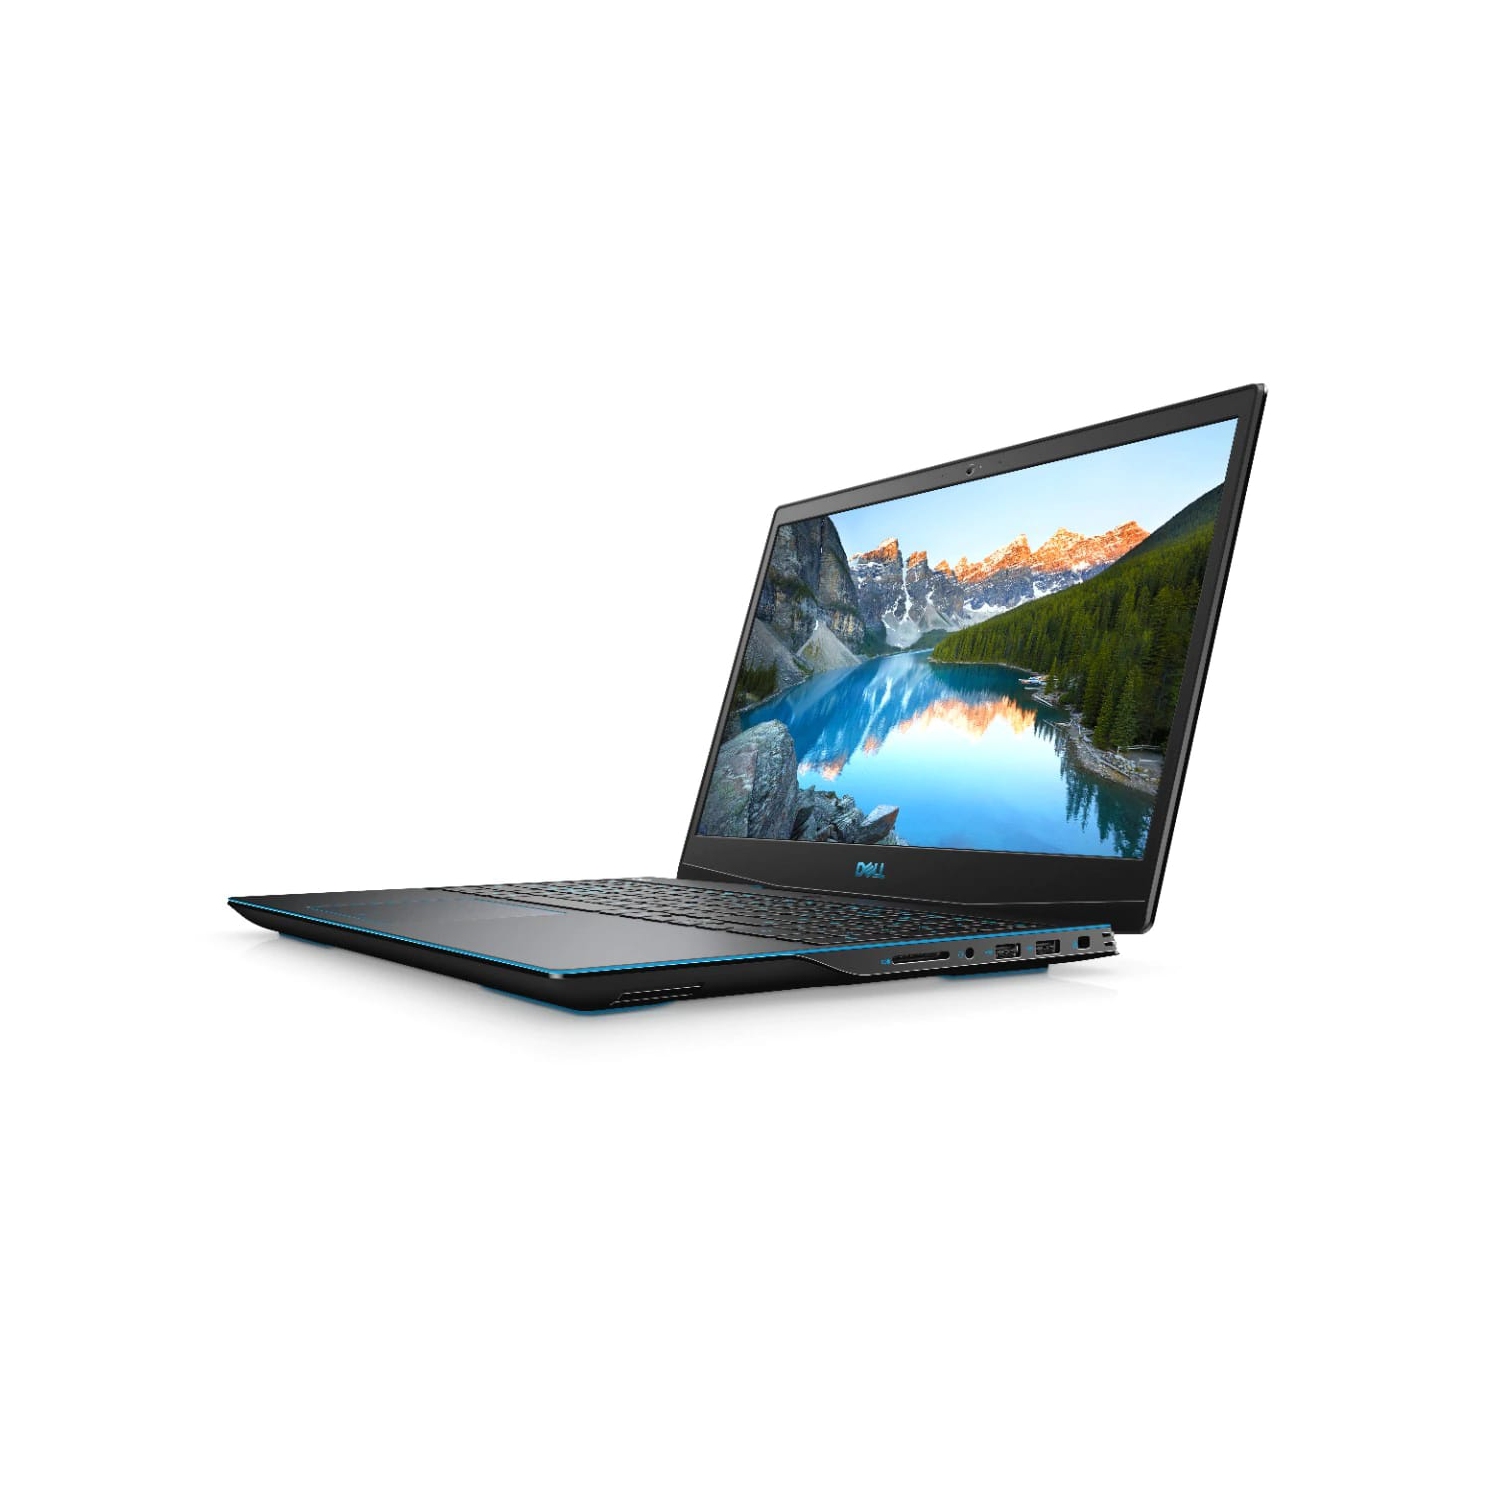 Refurbished (Excellent) – Dell G3 3500 Gaming Laptop (2020) | 15.6" FHD | Core i5 - 1TB SSD - 32GB RAM - 1650 Ti | 4 Cores @ 4.5 GHz - 10th Gen CPU